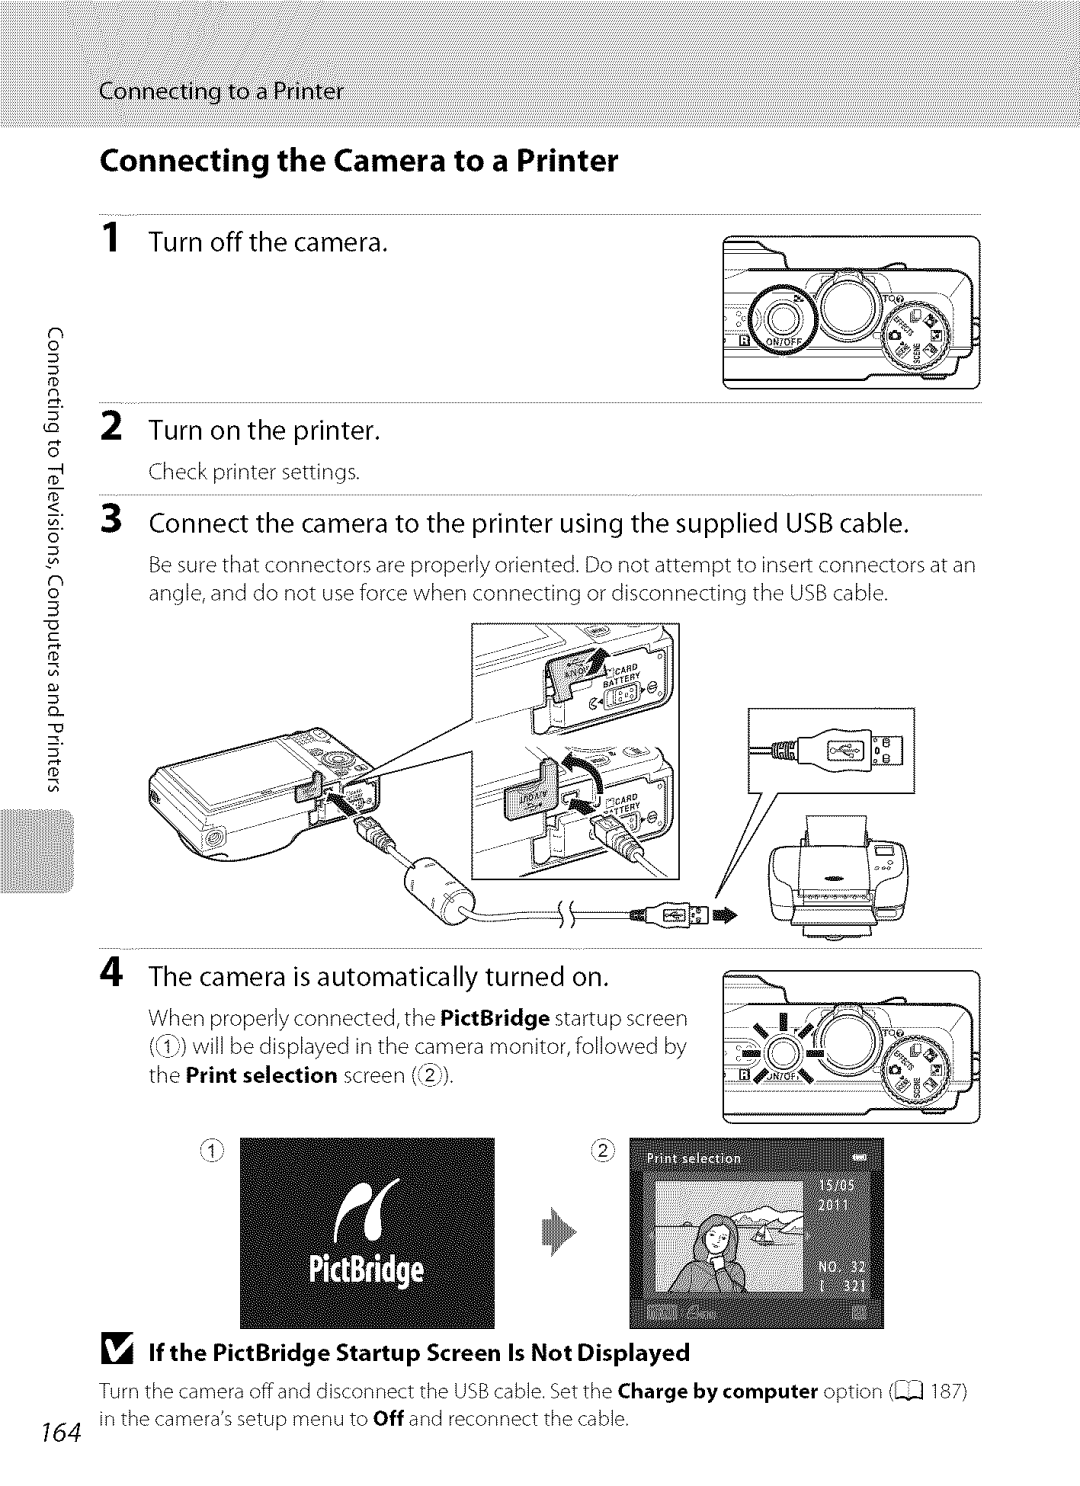 Nikon S9100 user manual Connecting the Camera to a Printer, Turn off the camera, the Pr nt se ect on screen 